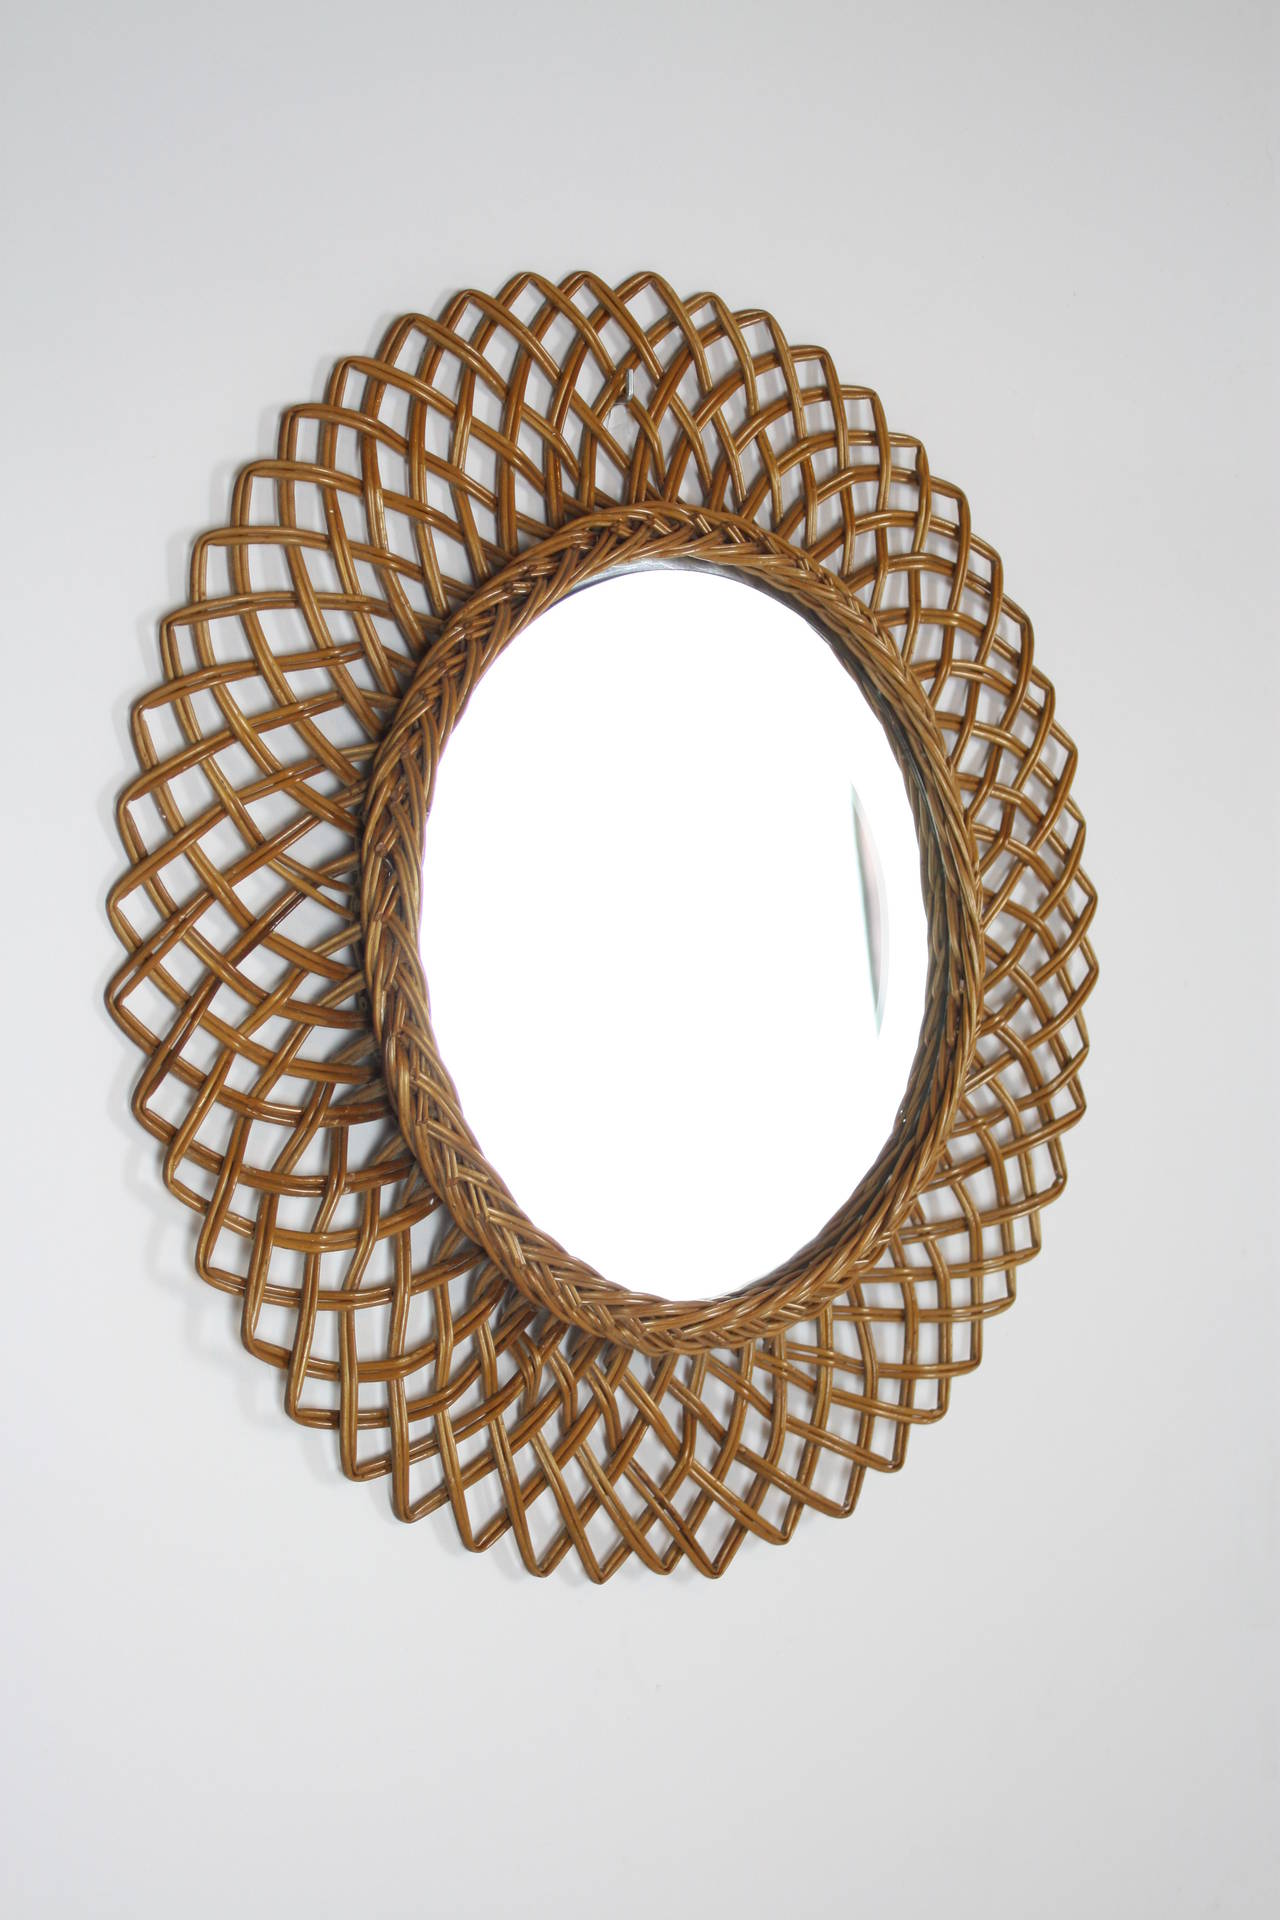 Rattan mirror with beautiful geometric handcrafted design.